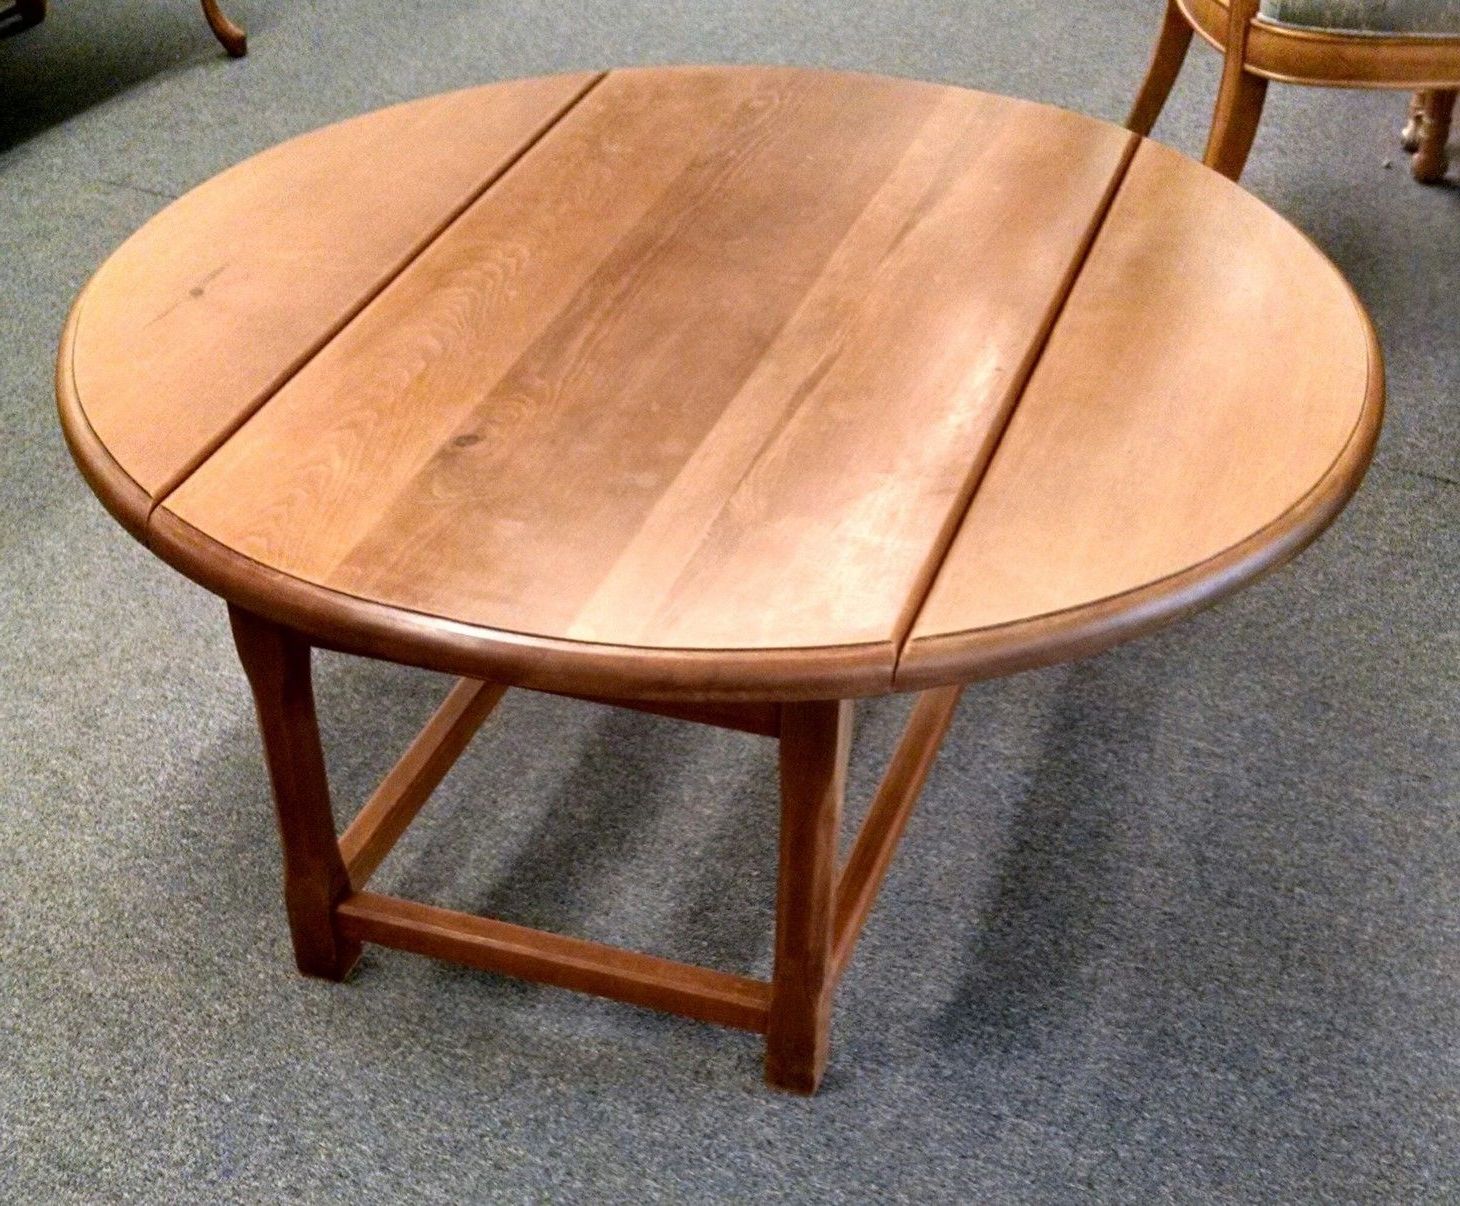 Well Known Leaf Round Coffee Tables In Oval Drop Leaf Coffee Table (View 3 of 20)